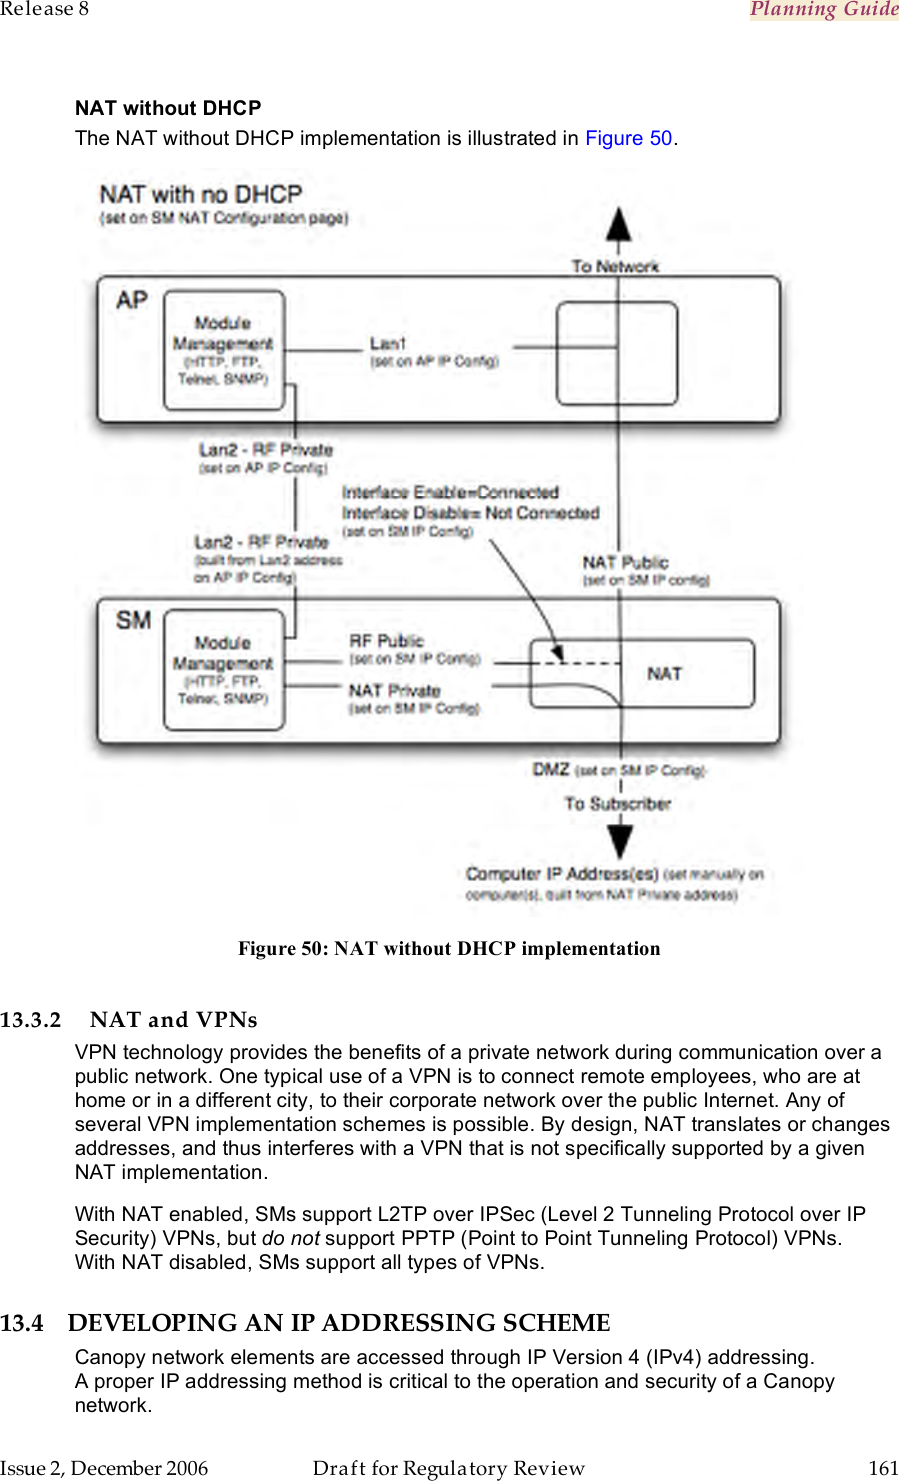 Release 8    Planning Guide                  March 200                  Through Software Release 6.   Issue 2, December 2006  Draft for Regulatory Review  161     NAT without DHCP The NAT without DHCP implementation is illustrated in Figure 50.  Figure 50: NAT without DHCP implementation  13.3.2 NAT and VPNs VPN technology provides the benefits of a private network during communication over a public network. One typical use of a VPN is to connect remote employees, who are at home or in a different city, to their corporate network over the public Internet. Any of several VPN implementation schemes is possible. By design, NAT translates or changes addresses, and thus interferes with a VPN that is not specifically supported by a given NAT implementation. With NAT enabled, SMs support L2TP over IPSec (Level 2 Tunneling Protocol over IP Security) VPNs, but do not support PPTP (Point to Point Tunneling Protocol) VPNs. With NAT disabled, SMs support all types of VPNs. 13.4 DEVELOPING AN IP ADDRESSING SCHEME Canopy network elements are accessed through IP Version 4 (IPv4) addressing.  A proper IP addressing method is critical to the operation and security of a Canopy network. 